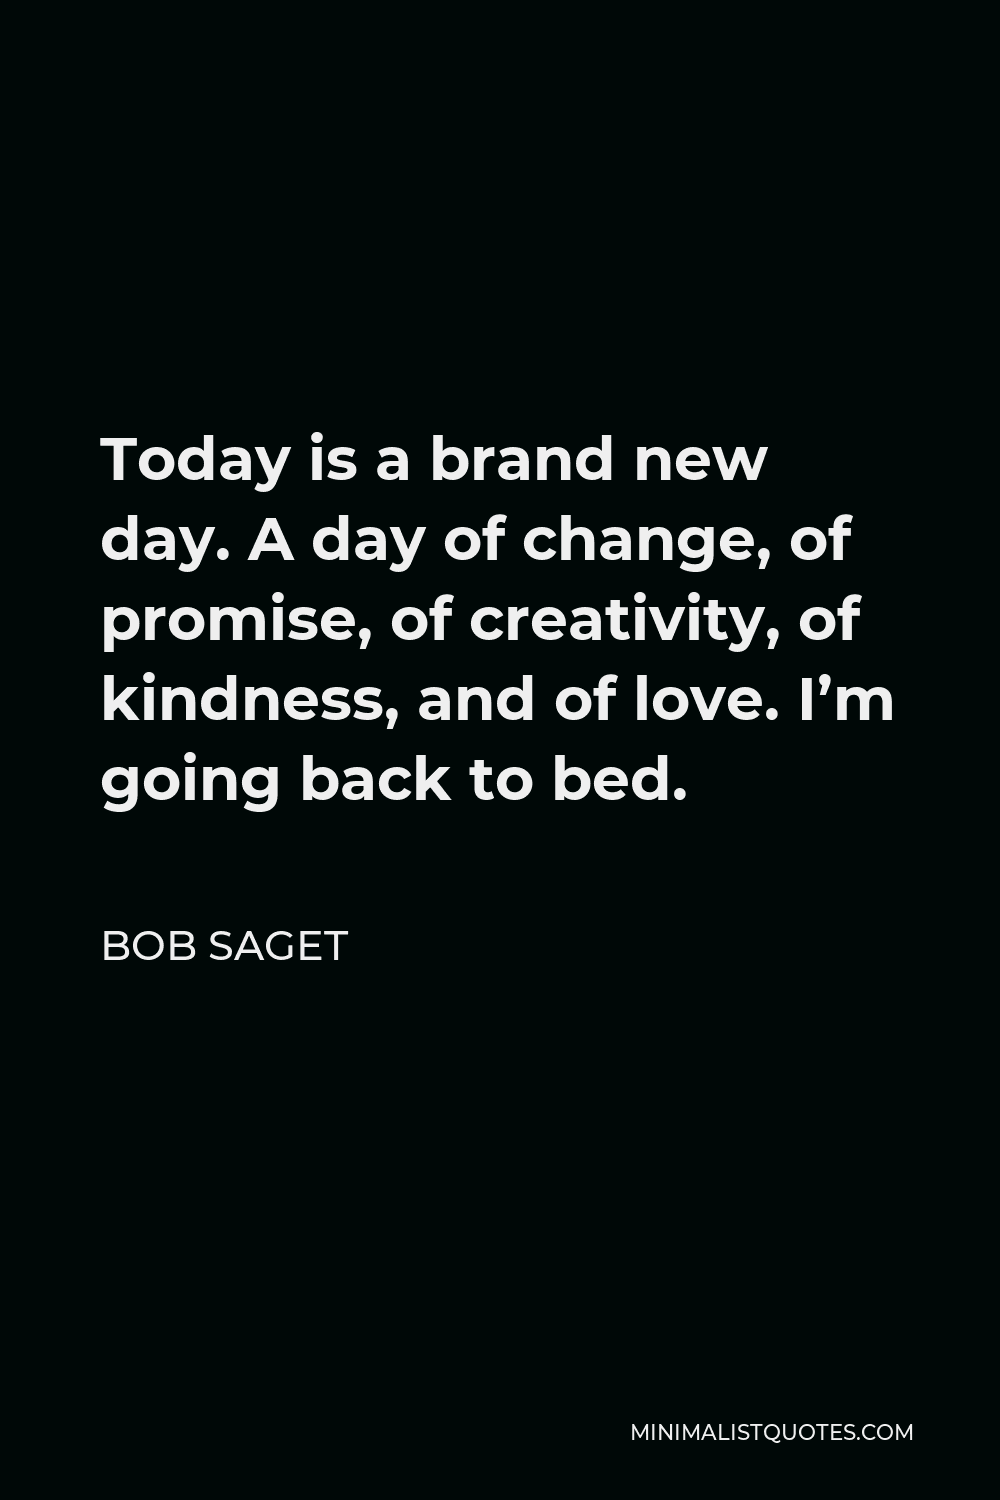 Bob Saget Quote - Today is a brand new day. A day of change, of promise, of creativity, of kindness, and of love. I’m going back to bed.